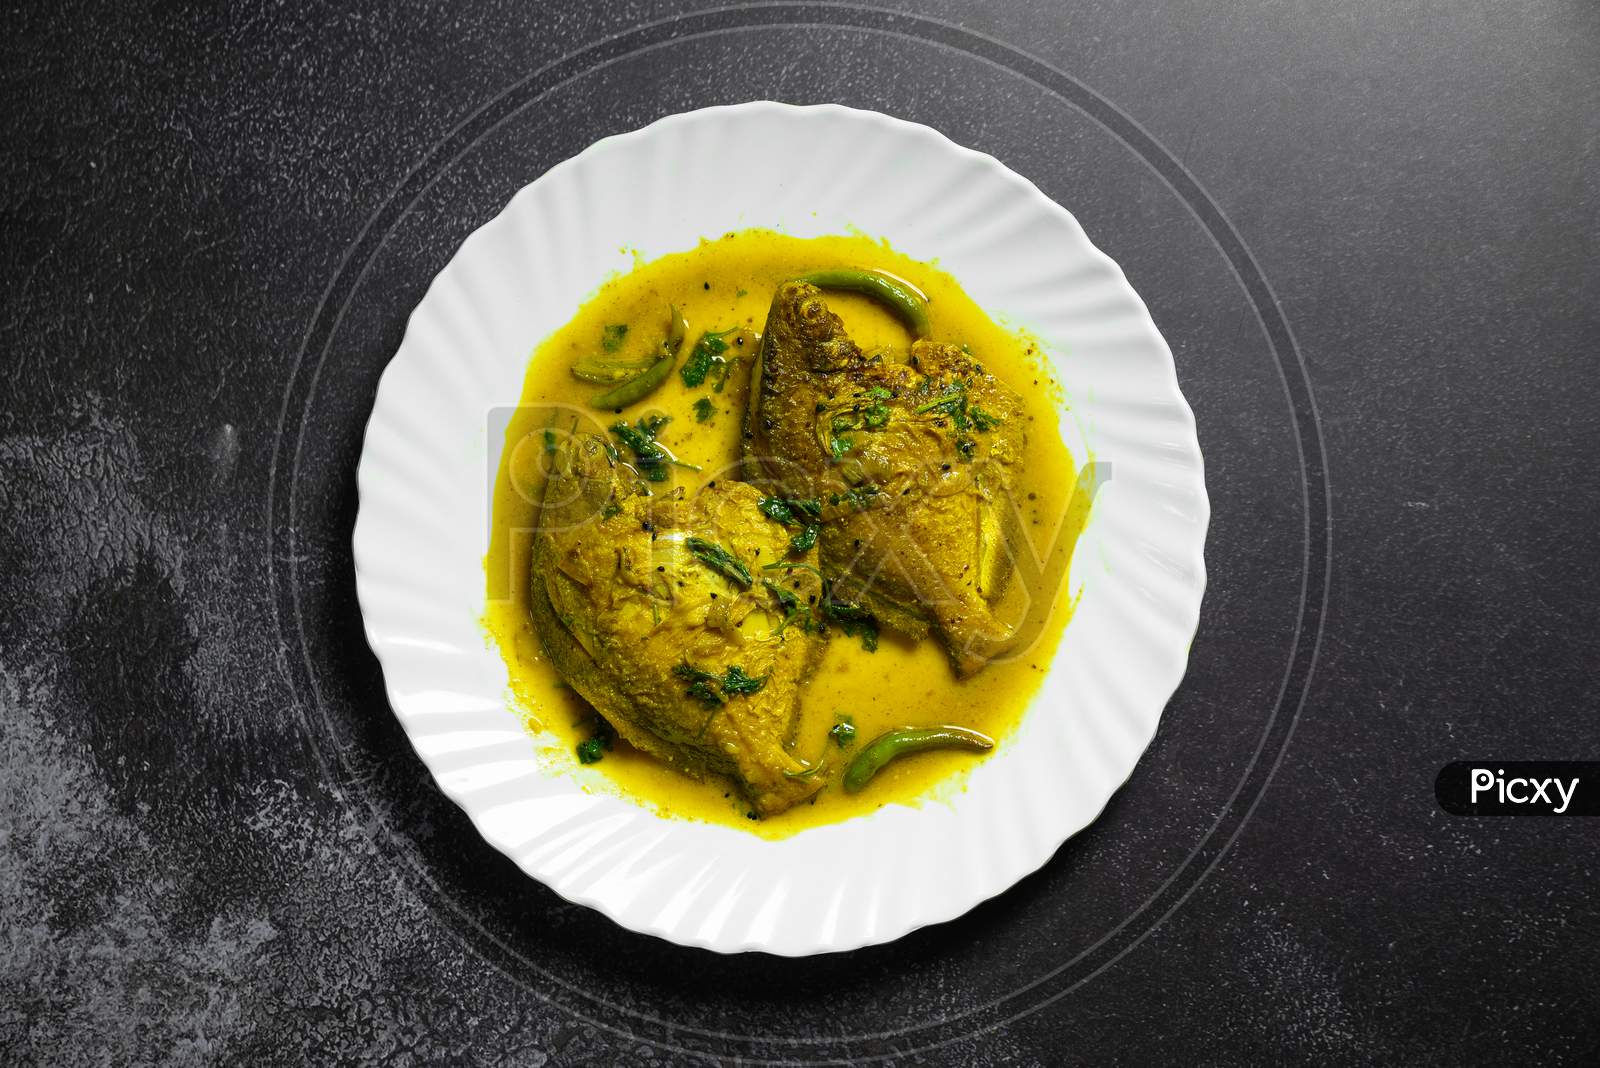 Pomfret In Mustard Gravy) Is An Authentic Bengali Recipe Which Is Made With Pomfret Fish.Pomfret Fish Curry, This Is A Traditional Bengali Homemade Dish.